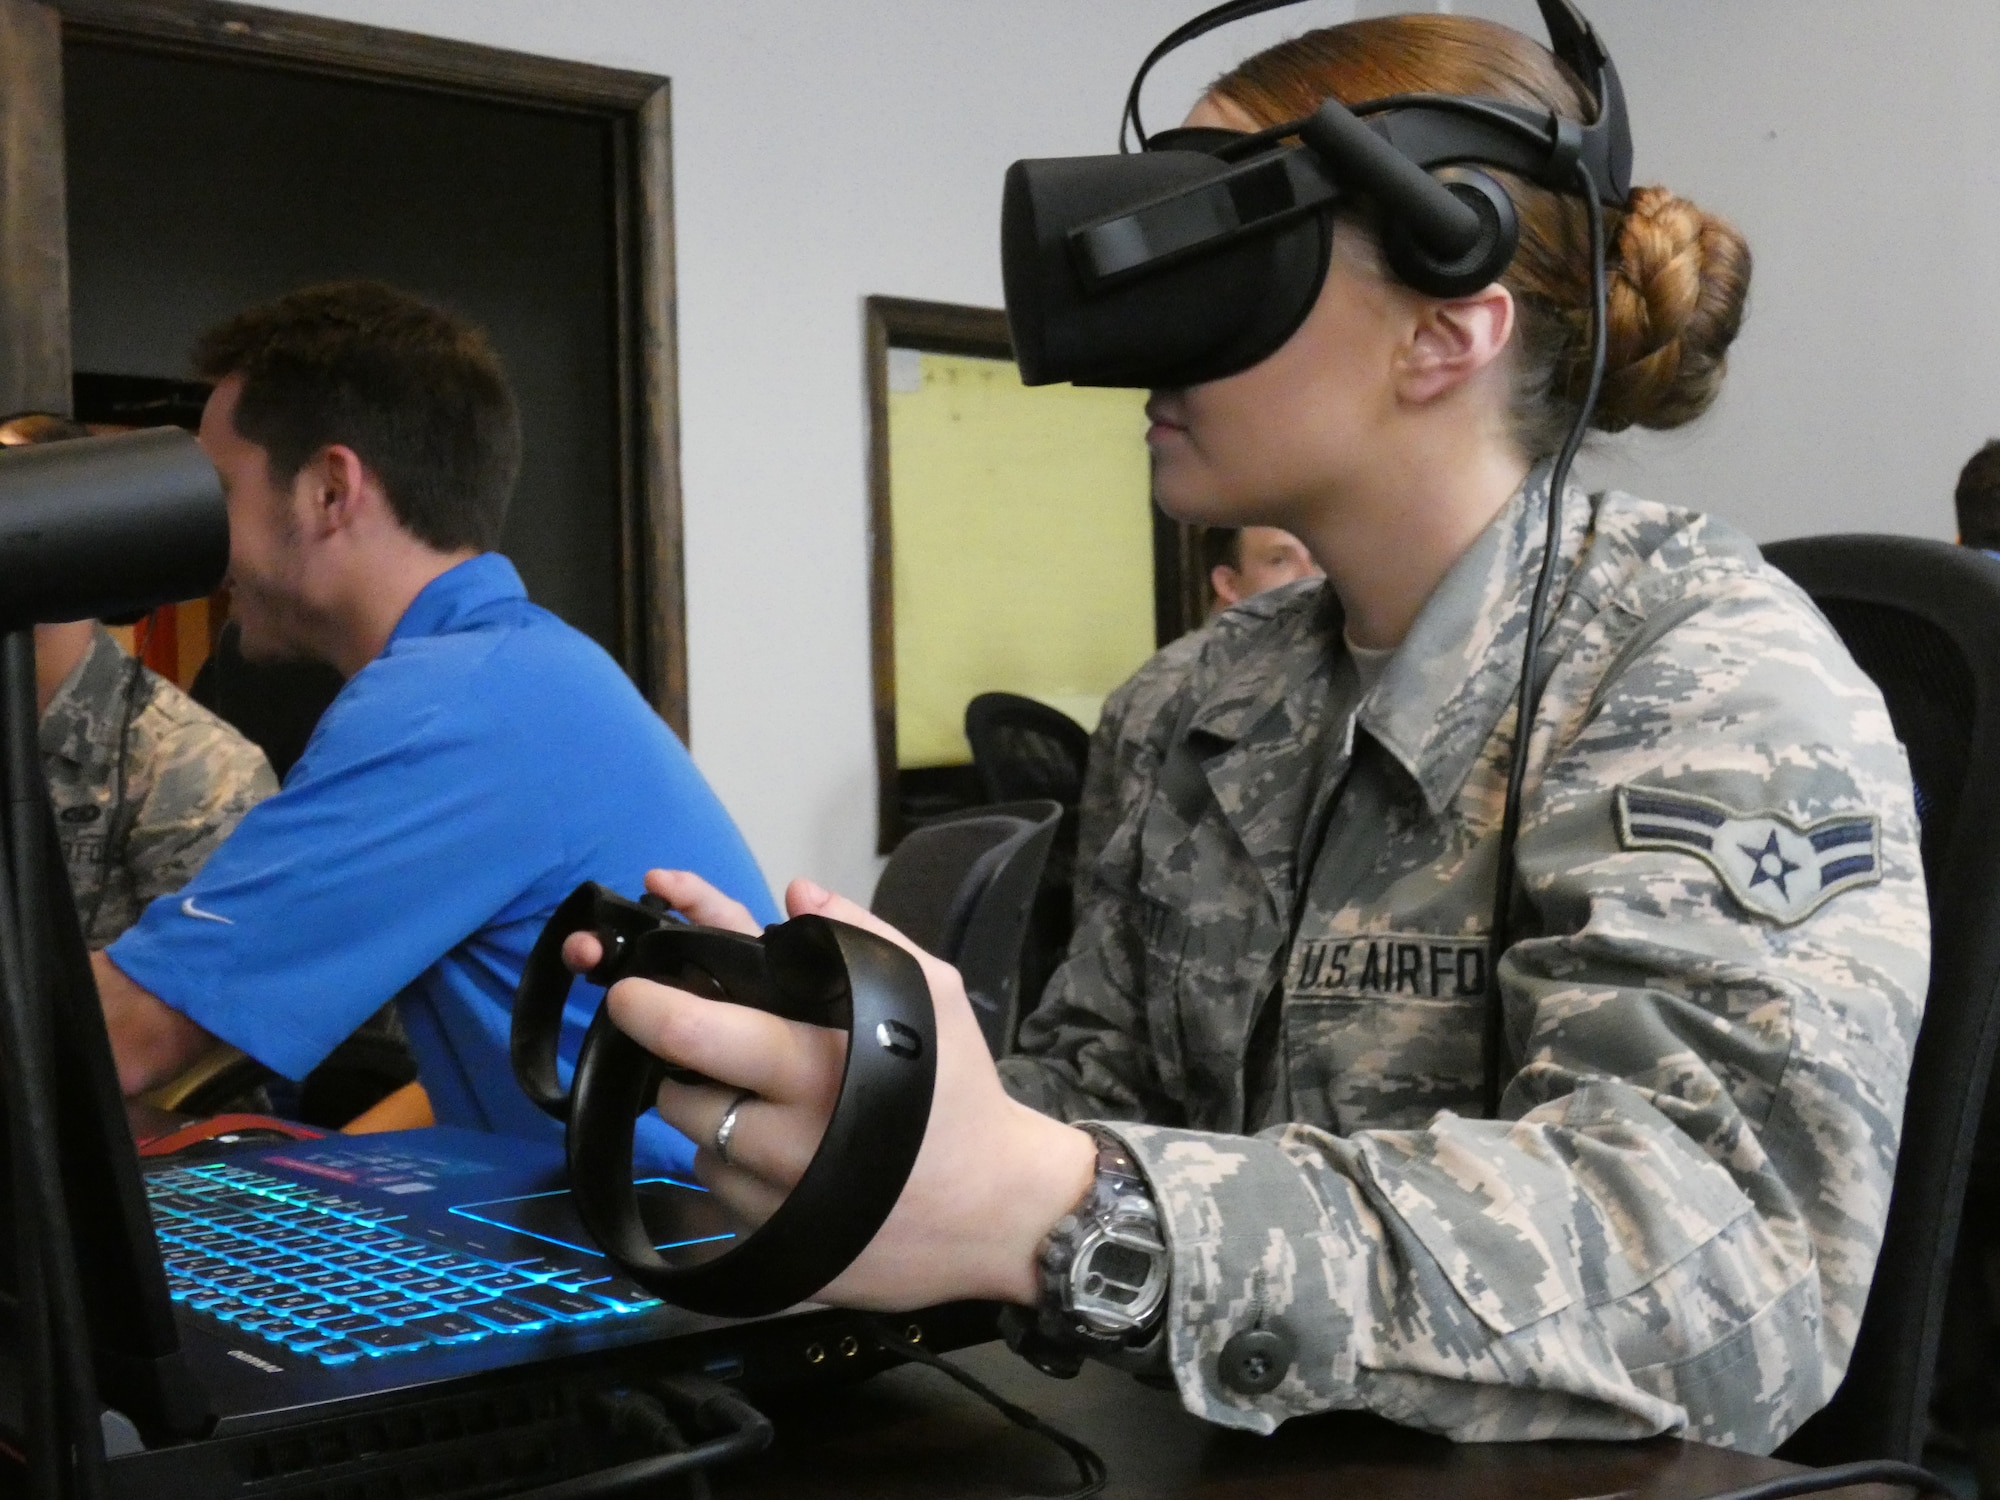 Airman 1st Class Lysle, 36th Intelligence Squadron, completes a virtual reality demo at a collaborative workspace in downtown Norfolk, Virginia.